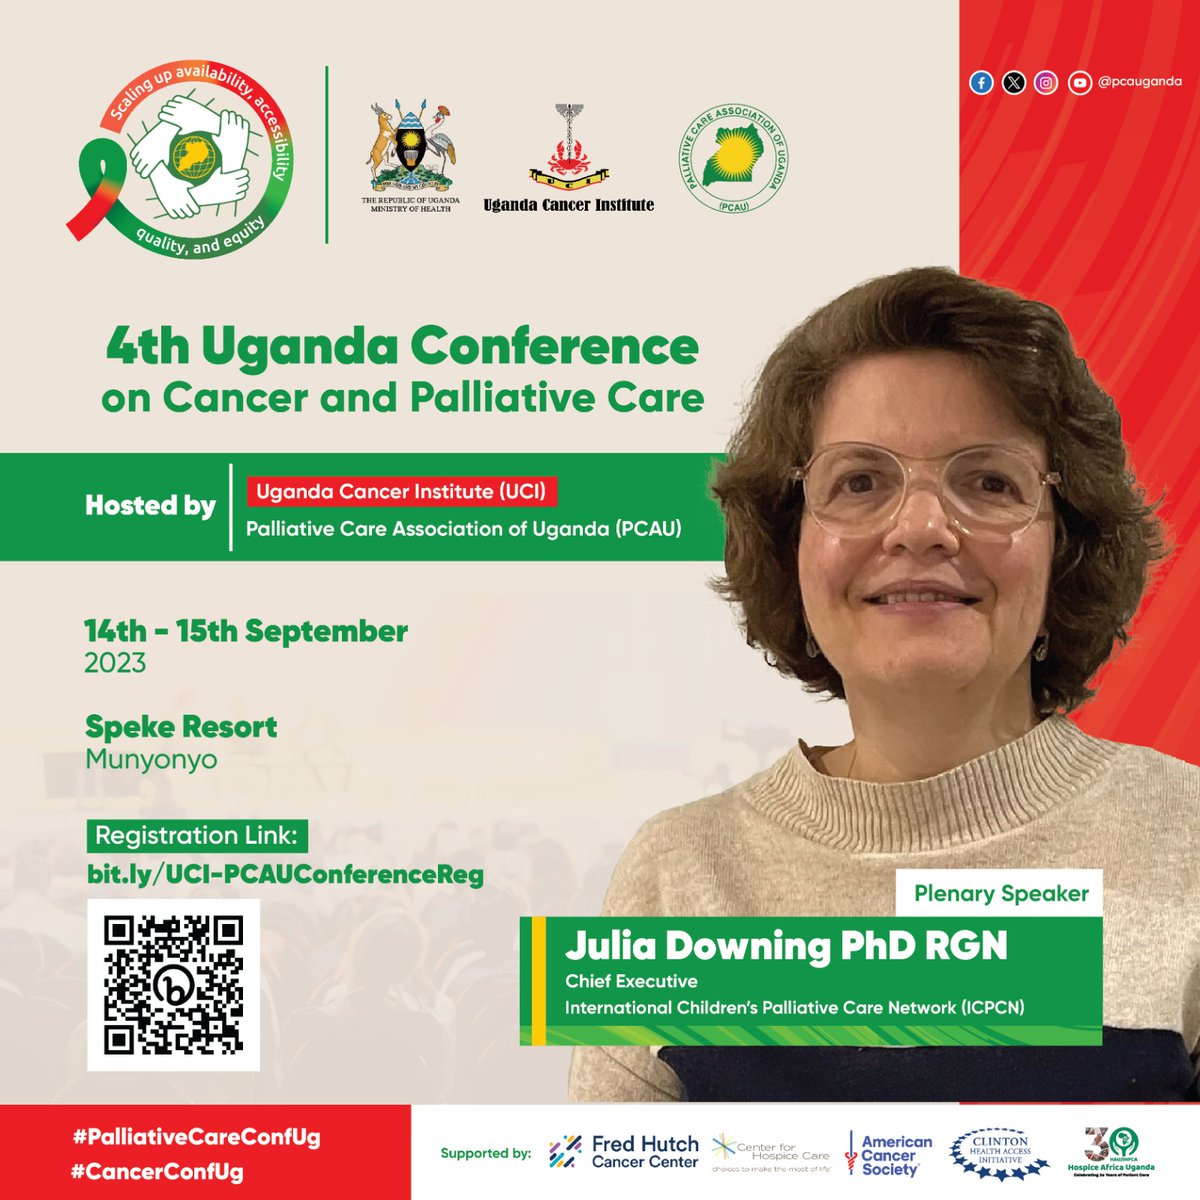 Prof. Downing is an experienced palliative care nurse, educationist, & researcher. She is the Chief Executive of the International Children's Palliative Care Network (ICPCN) & a professor at several universities. #CancerConfUg #PalliativeCareConfUg @UgandaCancerIns @PCAUganda